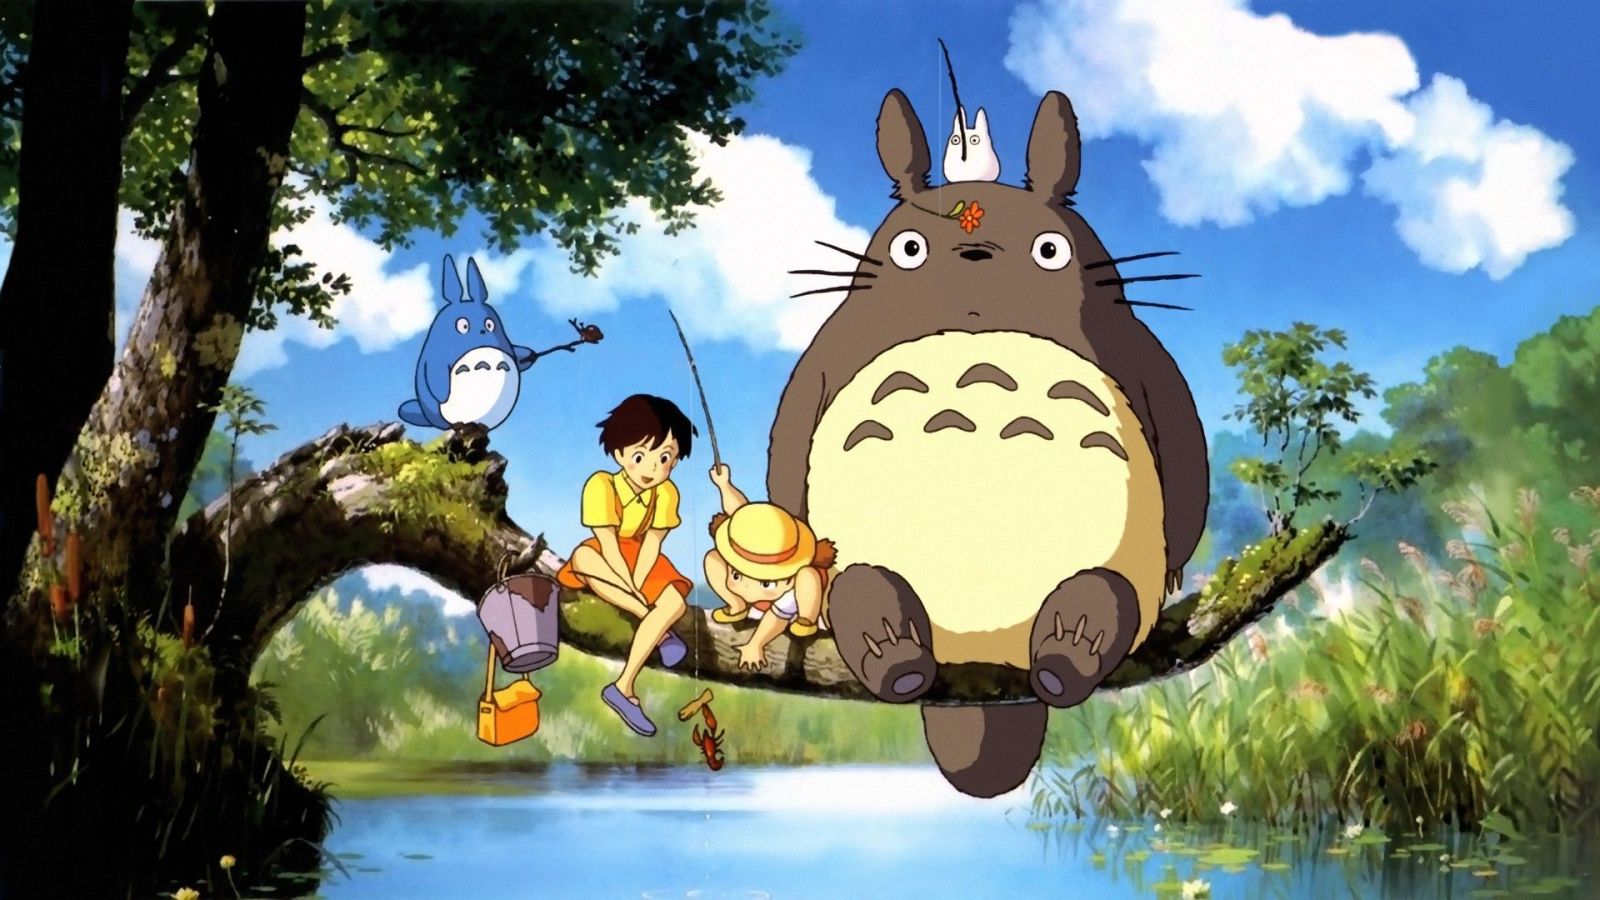 how to draw my neighbor totoro characters | - DragoArt